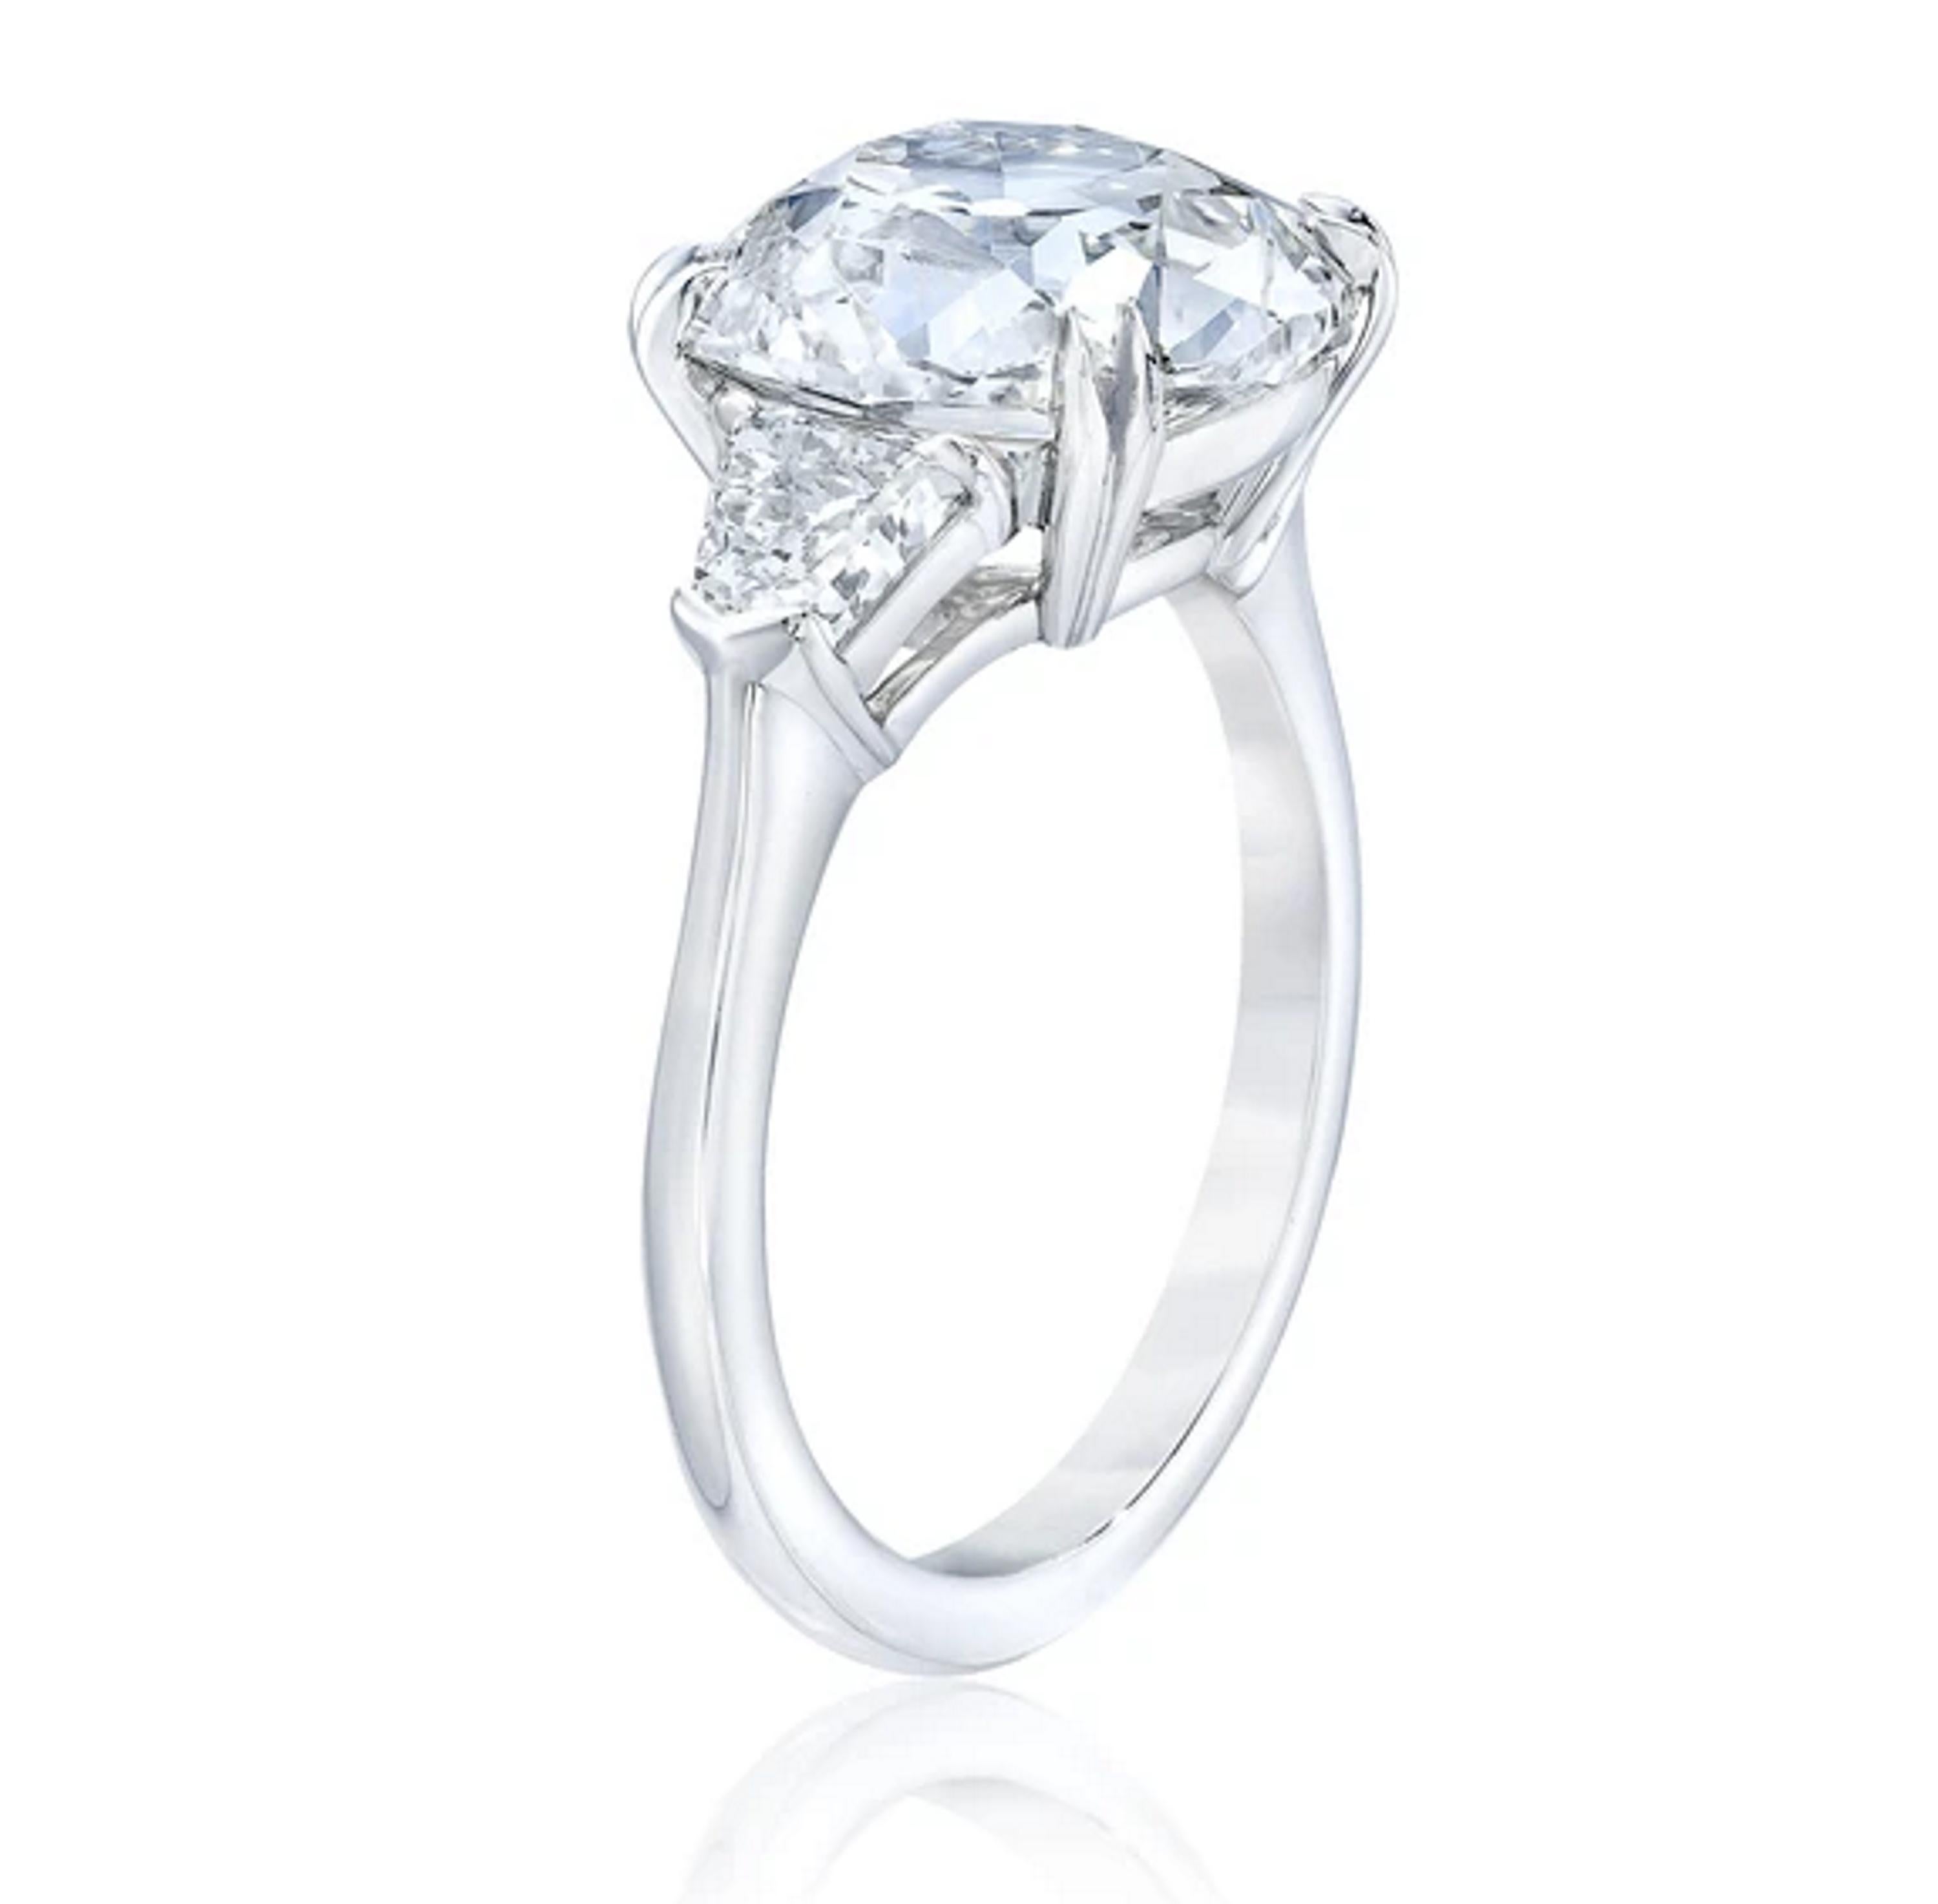 This three stone diamond ring features an 1.75 Old Mine Cut center 
egl Certificate Included
Gemstone:  Diamond
Diamond Weight: 1.75 Carats - Old Mine Brilliant Cut - 
Center Diamond Color: h
Diamond Clarity: vs2
1.75ct old mine cut certified